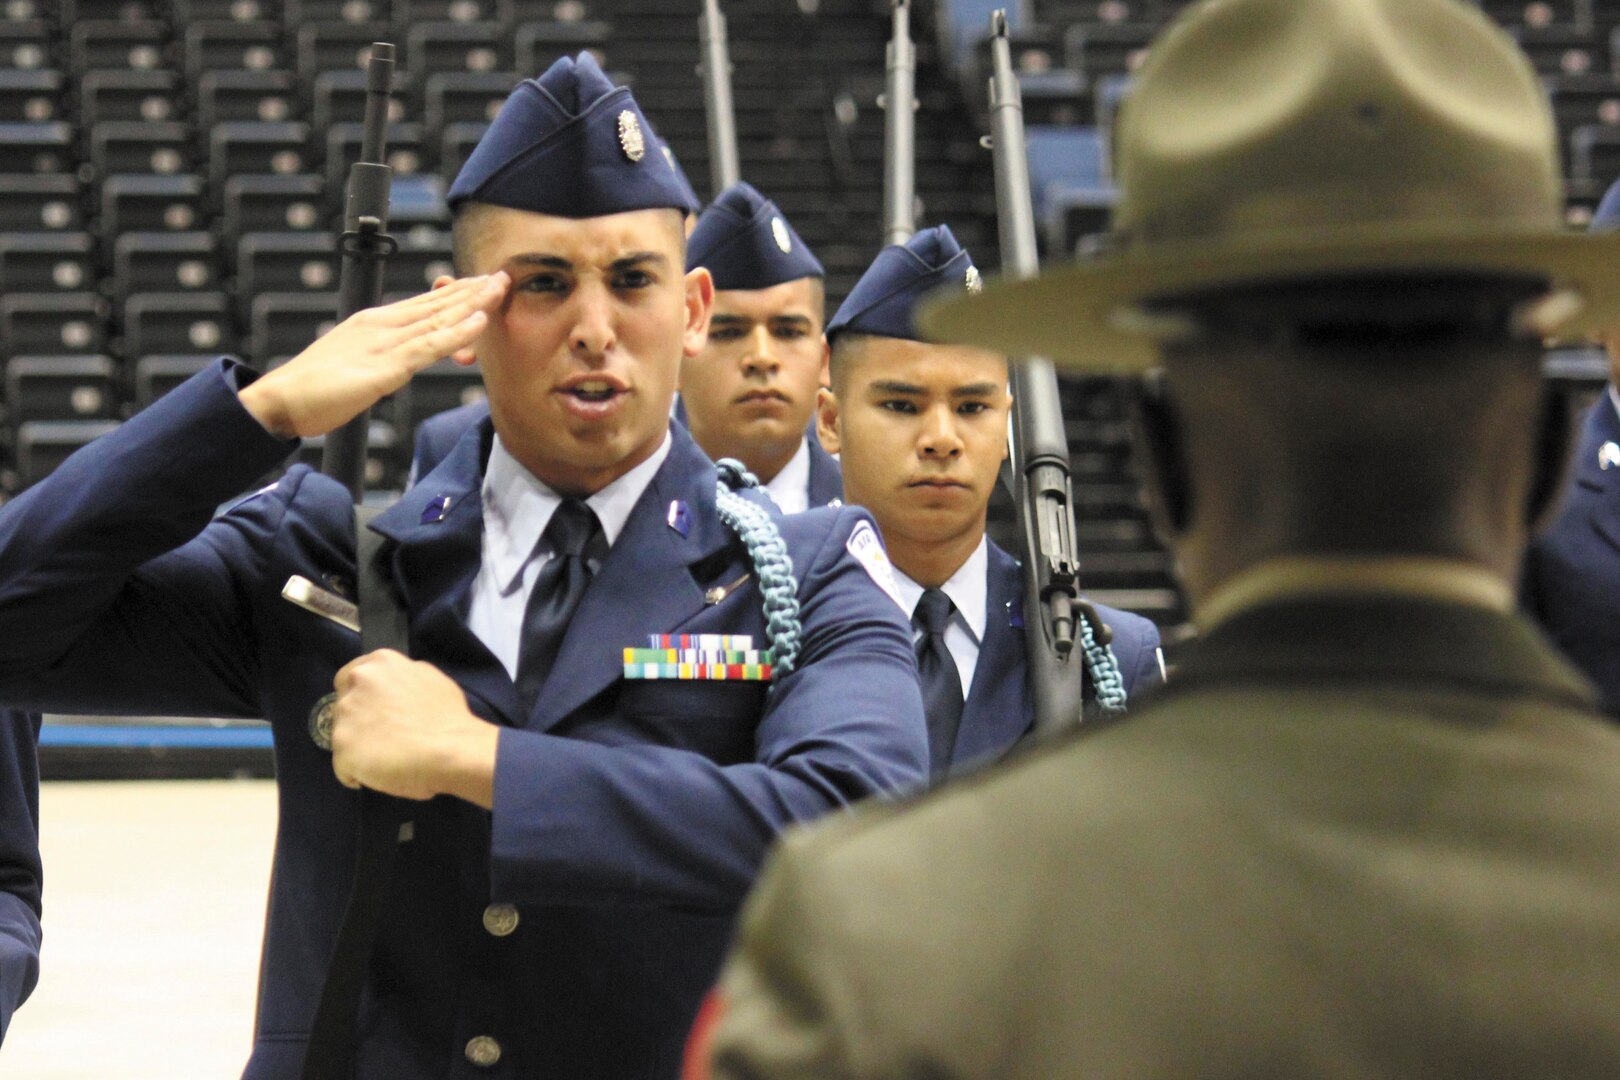 Marcus Zapata, commander of the John Jay High School Silver Eagles Armed Drill Team, salutes a judge during the U.S. Nationals High School Armed Drill Team competition. The Silver Eagles from San Antonio competed against more than 20 JROTC drill teams and won. (Courtesy photo)